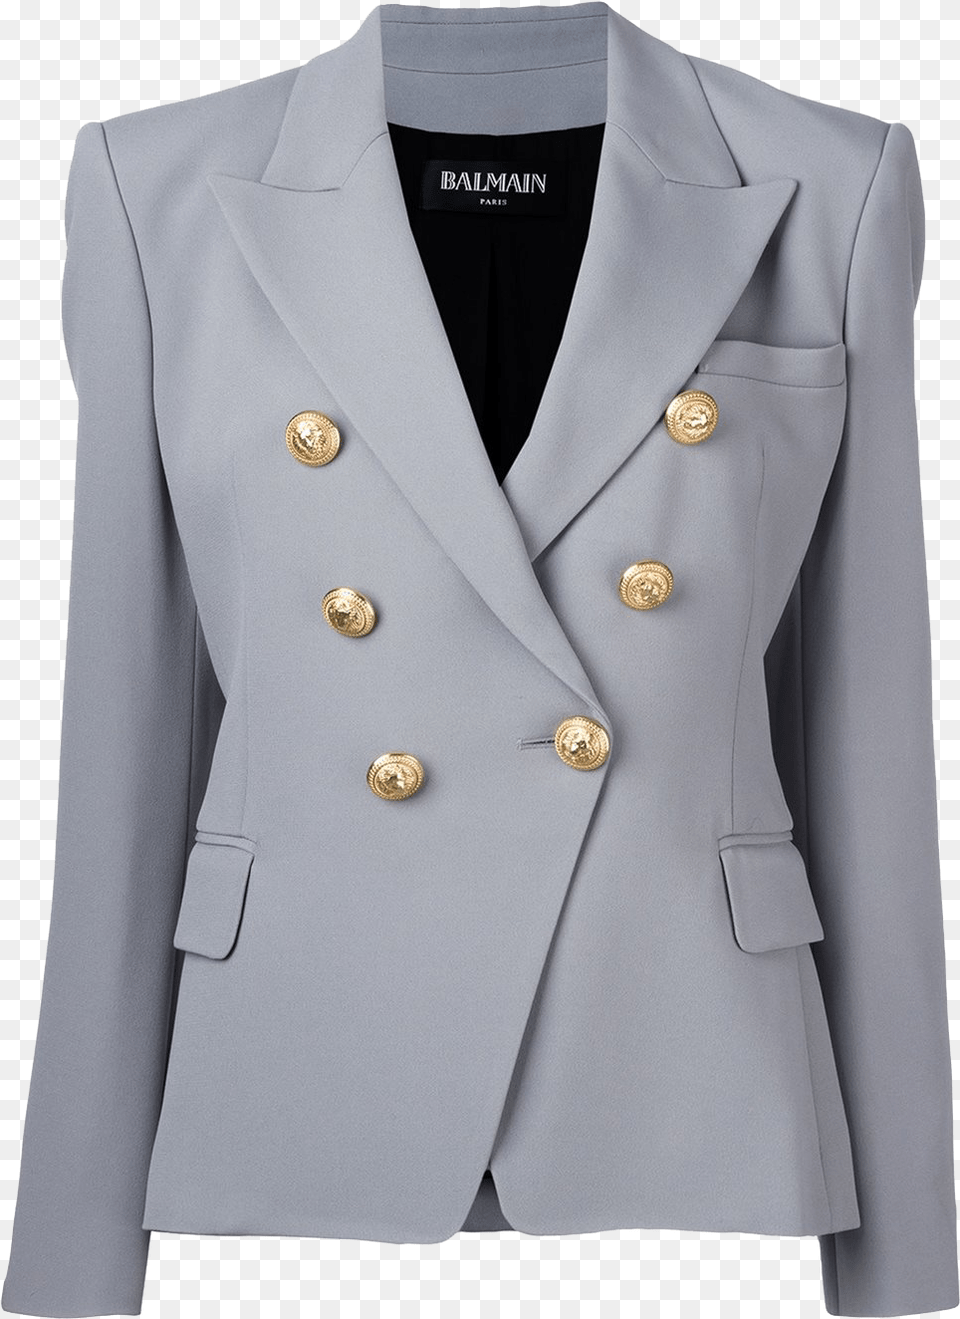 Women Double Breasted Blazer Image File Balmain Jacket Woman, Clothing, Coat, Formal Wear, Suit Free Png Download